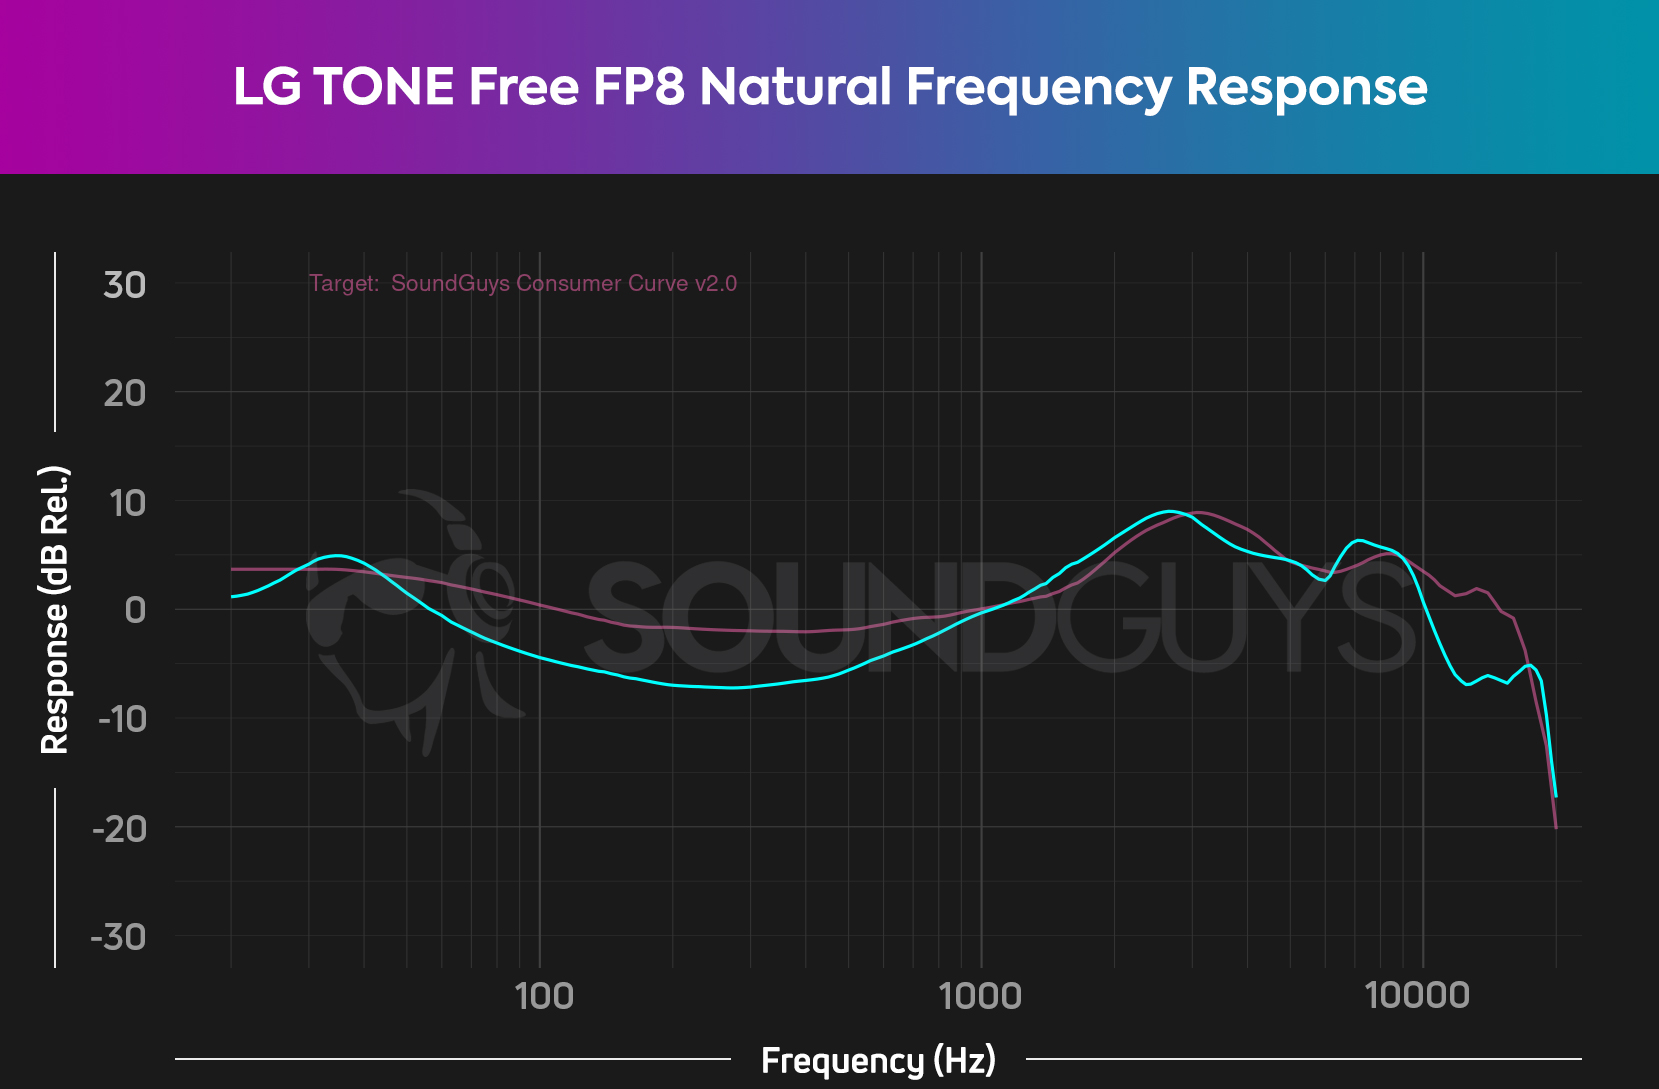 The Natural preset frequency response of the LG TONE Free FP8 attenuates the mids about 5dB lower than the SoundGuys curve.